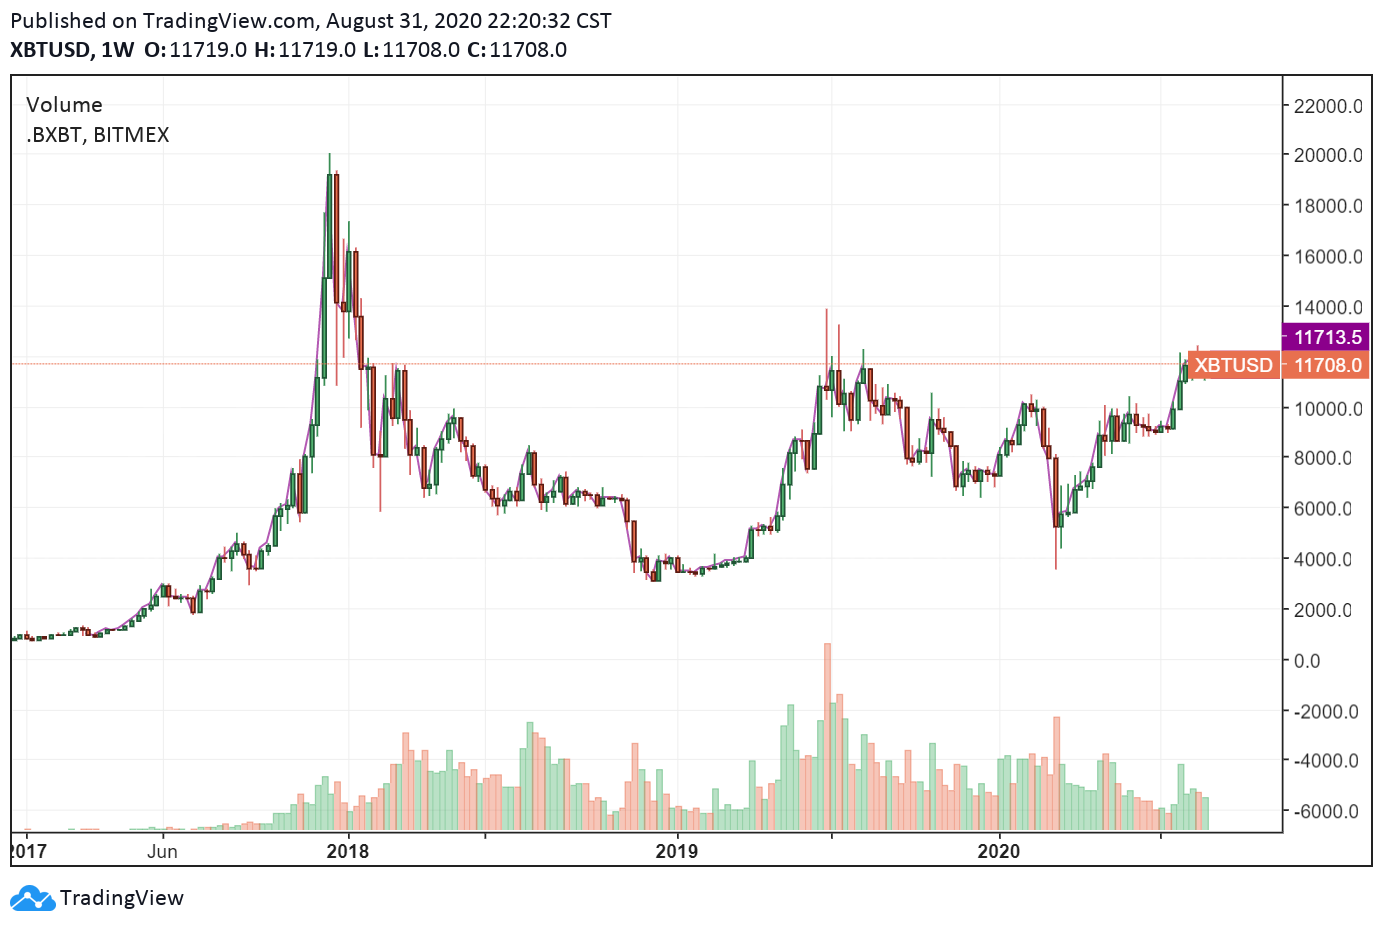 The weekly price chart of Bitcoin